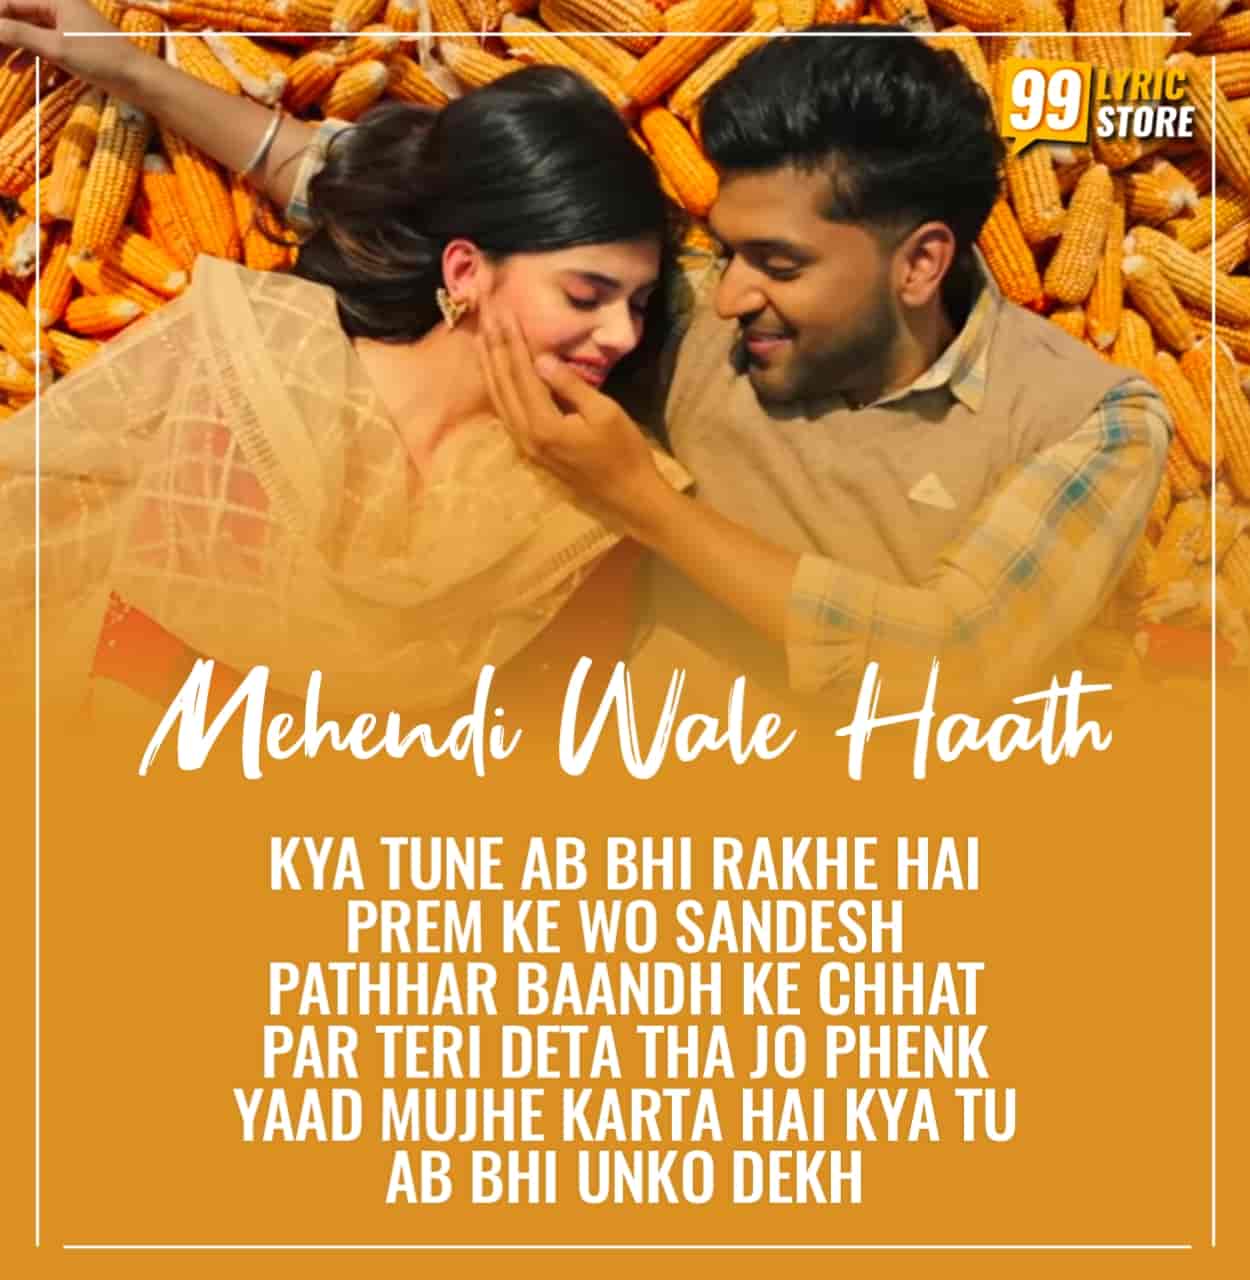 A very talented iconic punjabi artist Guru Randhawa come back again with a beautiful song which is titled Mehendi Wale Haath which is about a army men life, sung by him.